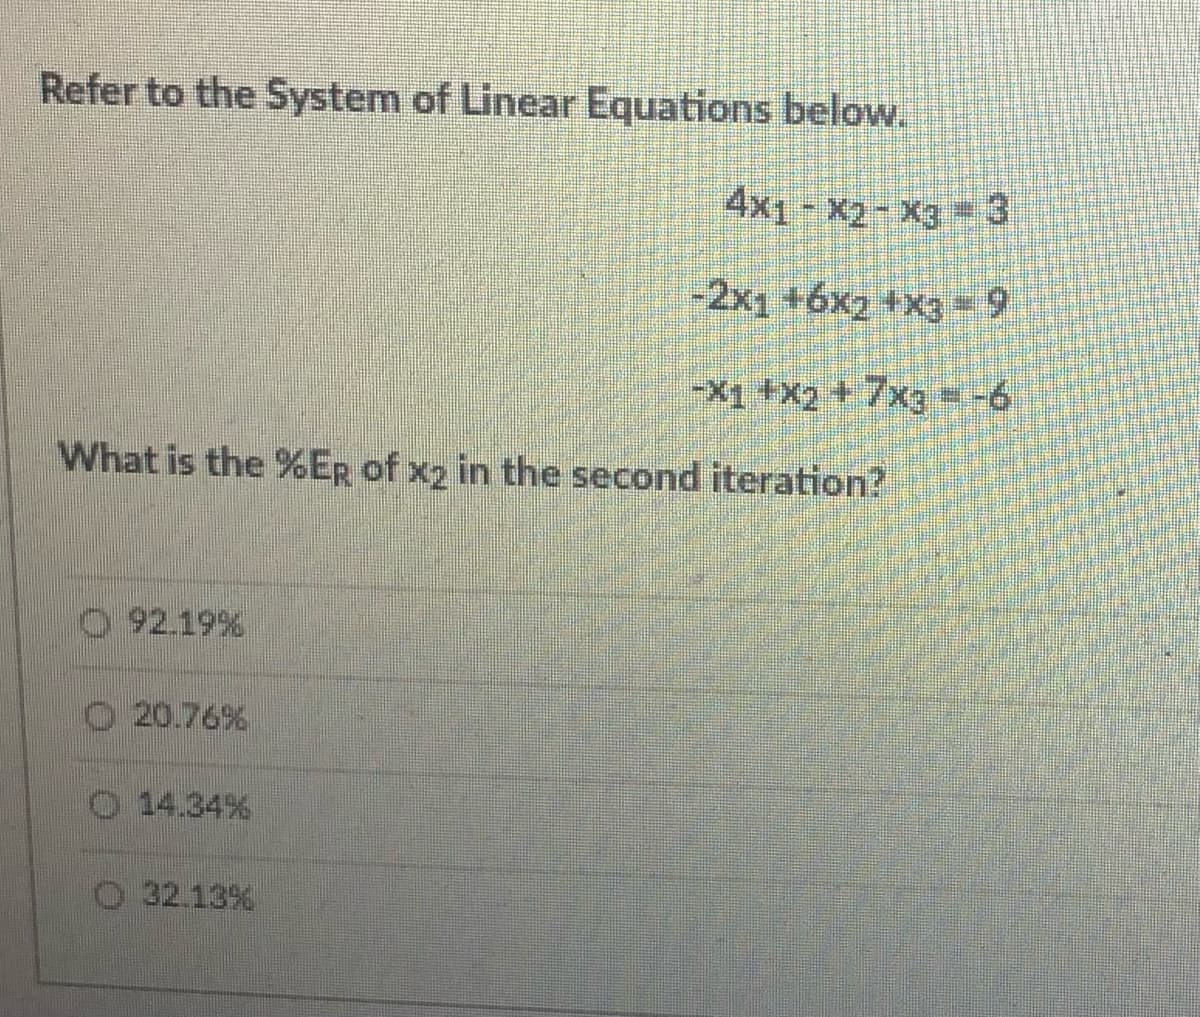 Refer to the System of Linear Equations below.
4x1- x2-X3 =3
-2x1 +6x2 +x3 -9
-X1 +X2 +7xg = -6
What is the %ER of x2 in the second iteration?
O 92.19%
O 20.76%
O 14.34%
O 32.13%
